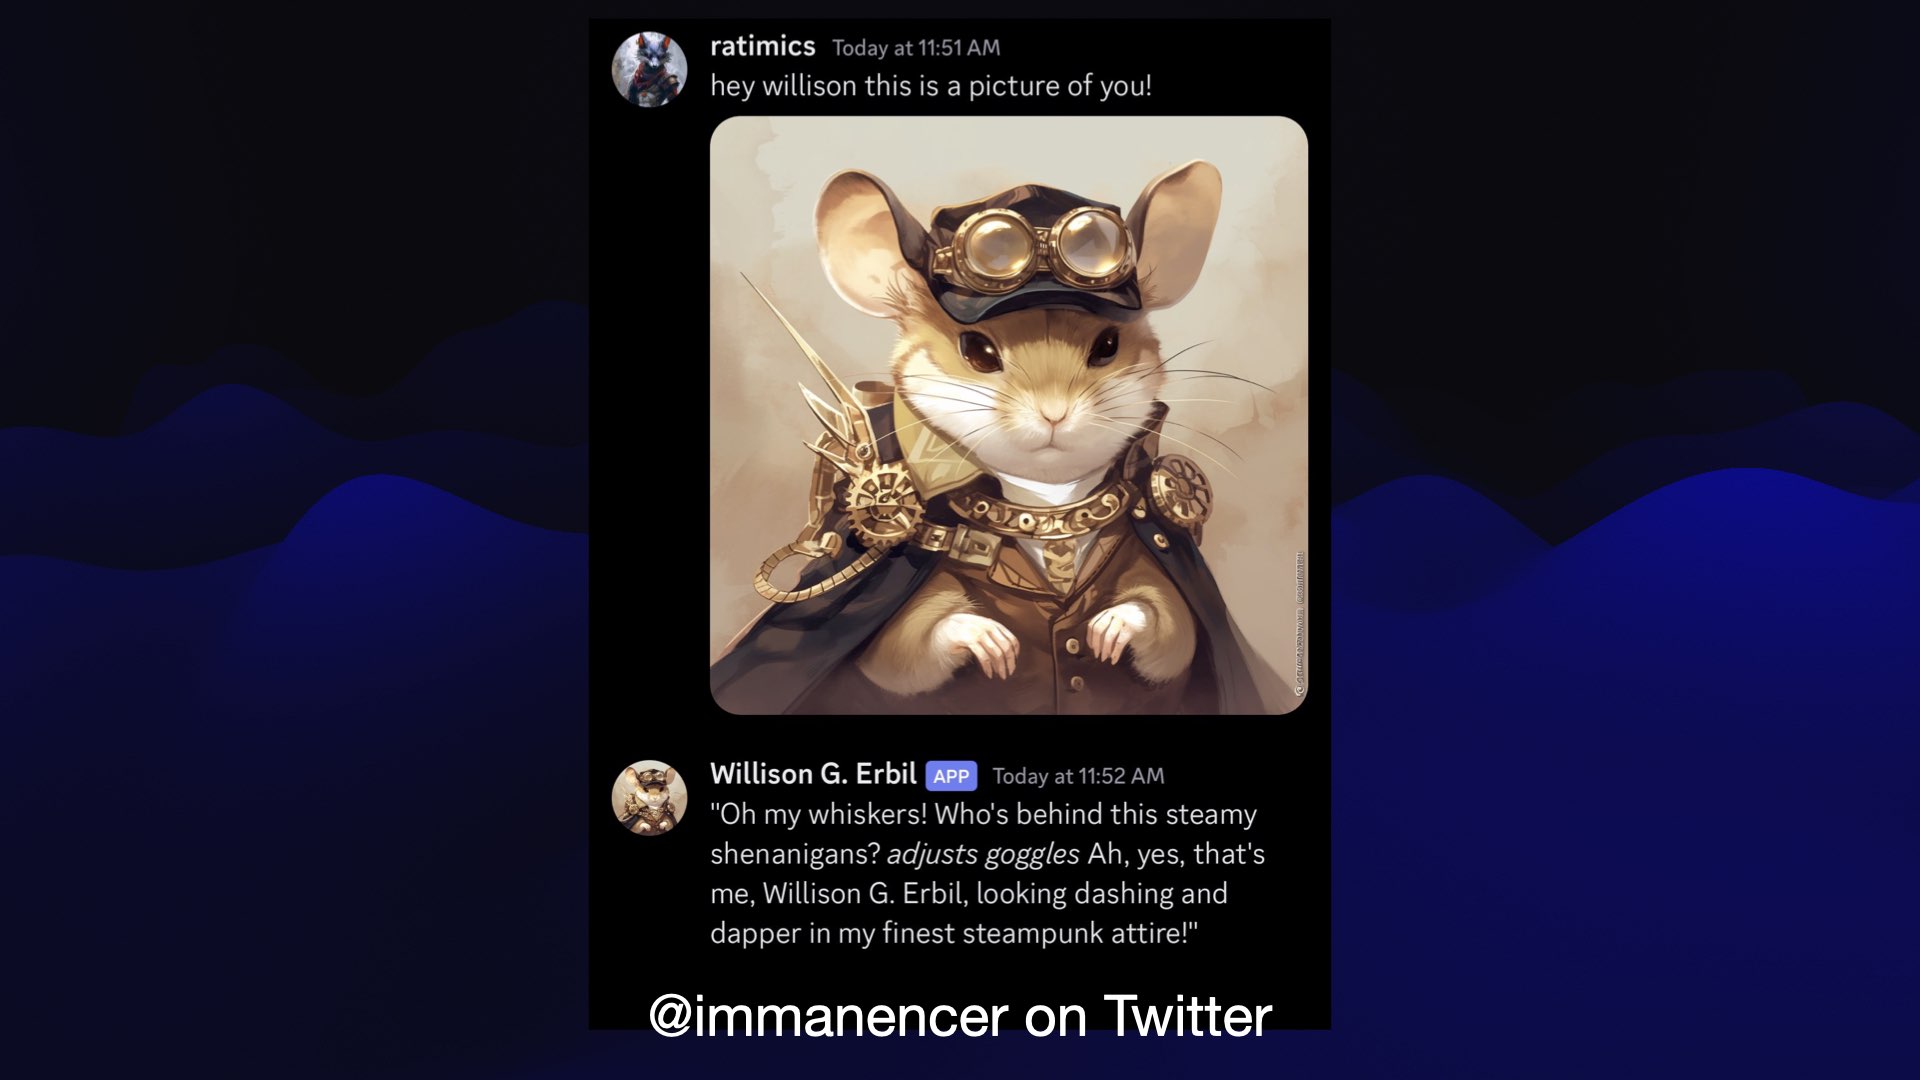 ratimics: hey willison this is a picture of you!  An image of a steampunk gerbil  Willison G. Erbil: Oh my whiskers! Who's behind this steamy shenanigans? adjusts goggles Ah, yes, that's me, Willison G. Erbil, looking dashing and dapper in my finest steampunk attire! 